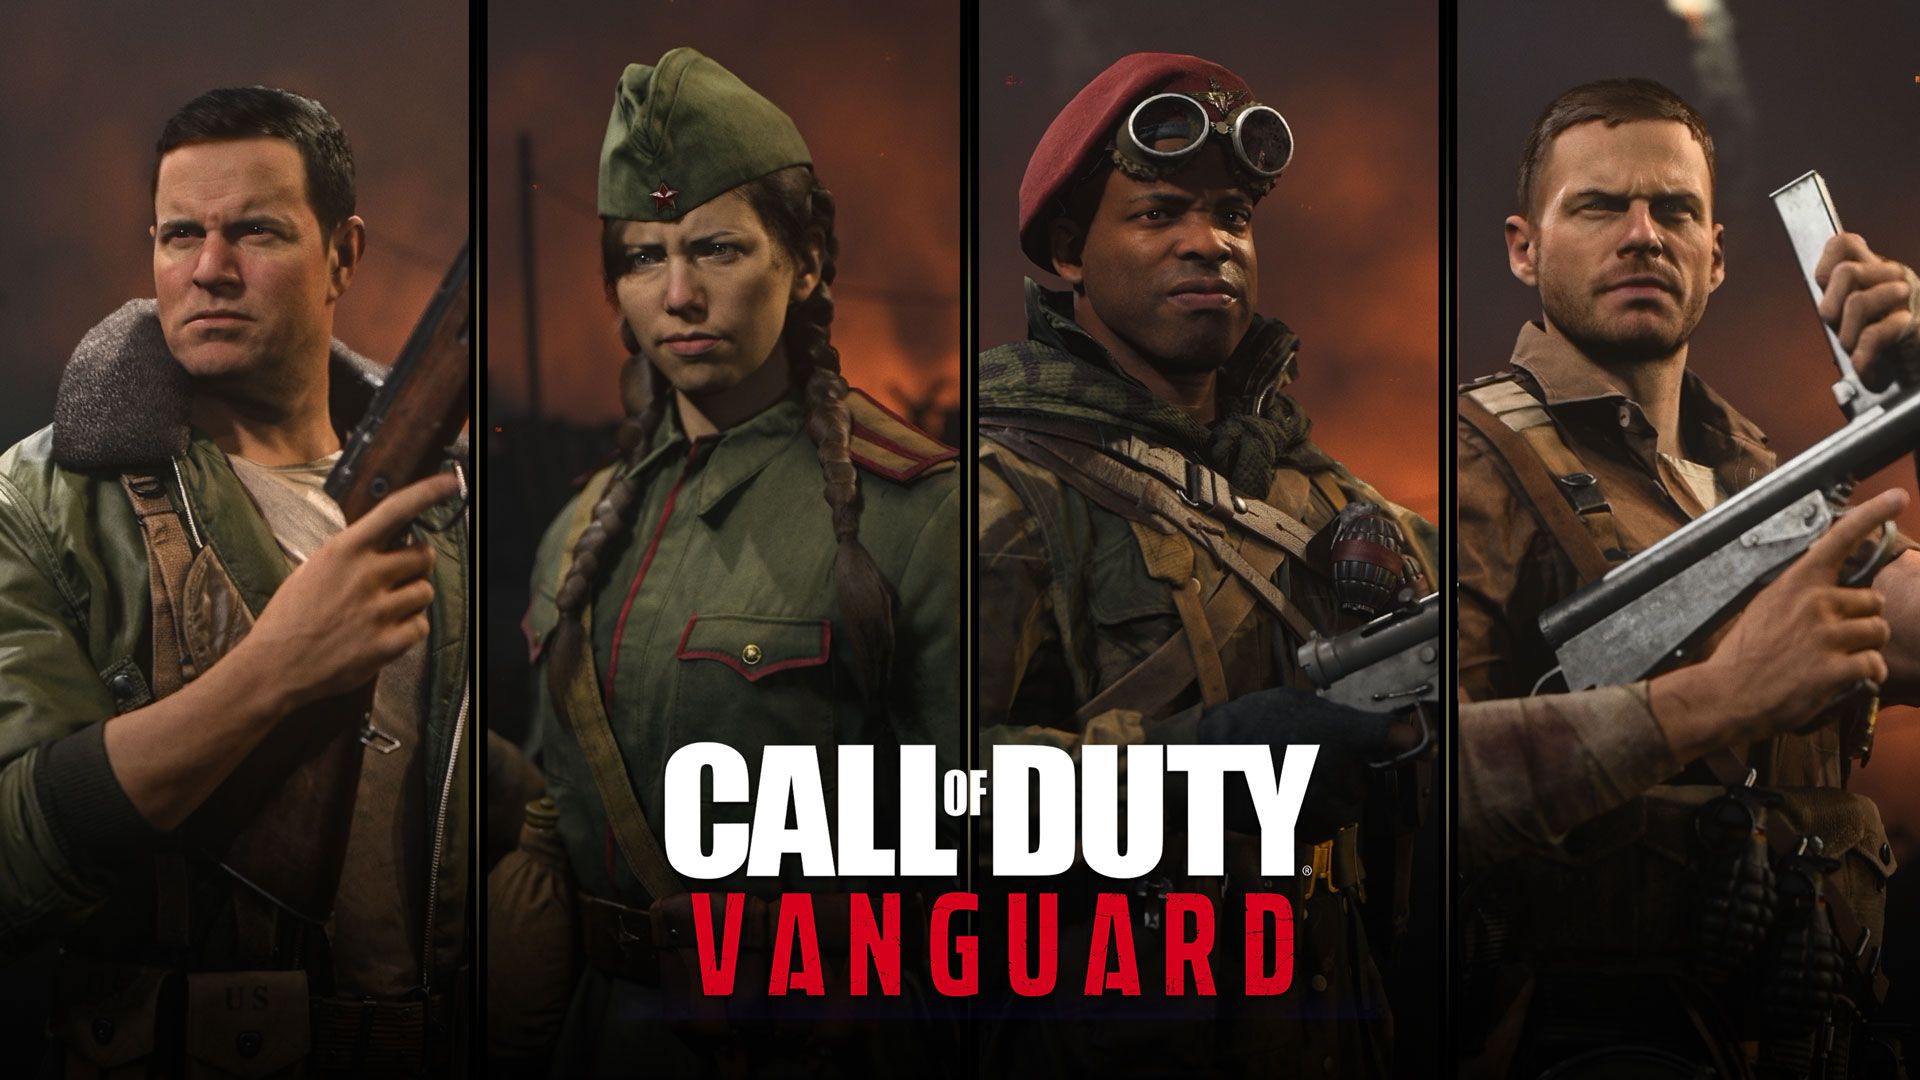 How To Fix Packet Burst In Call of Duty Vanguard